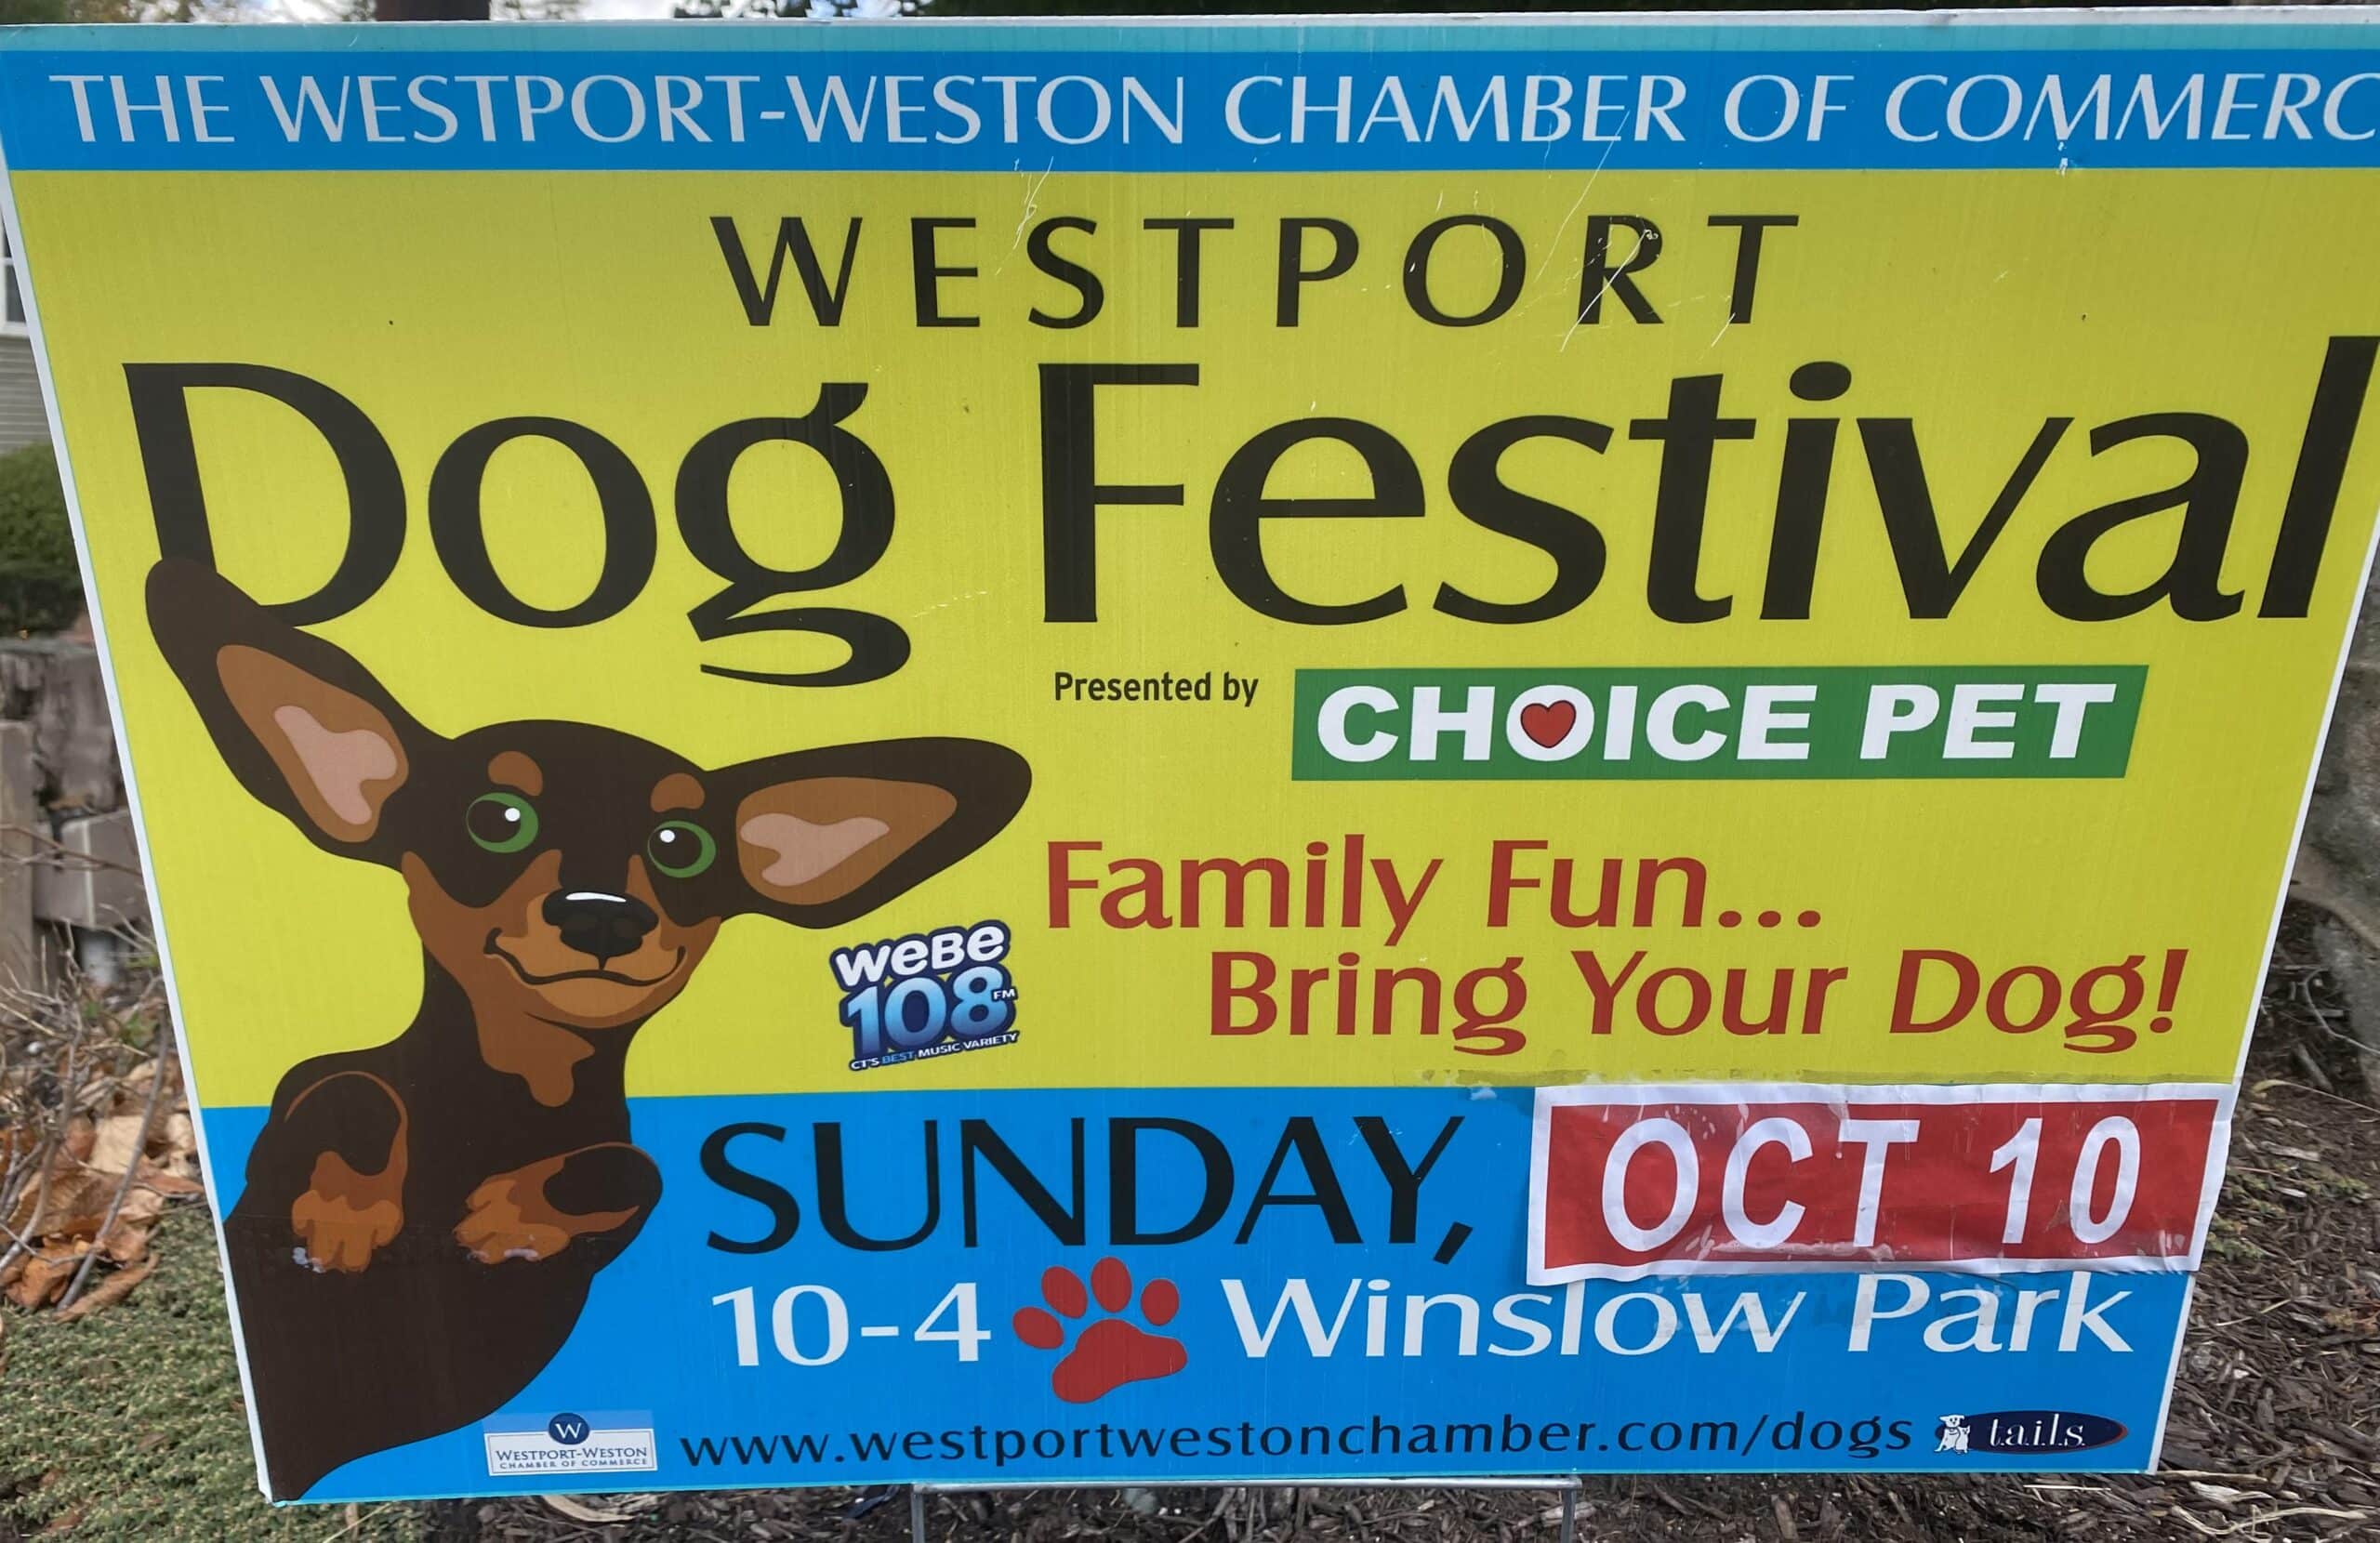 A sign for the Westport Dog Festival.